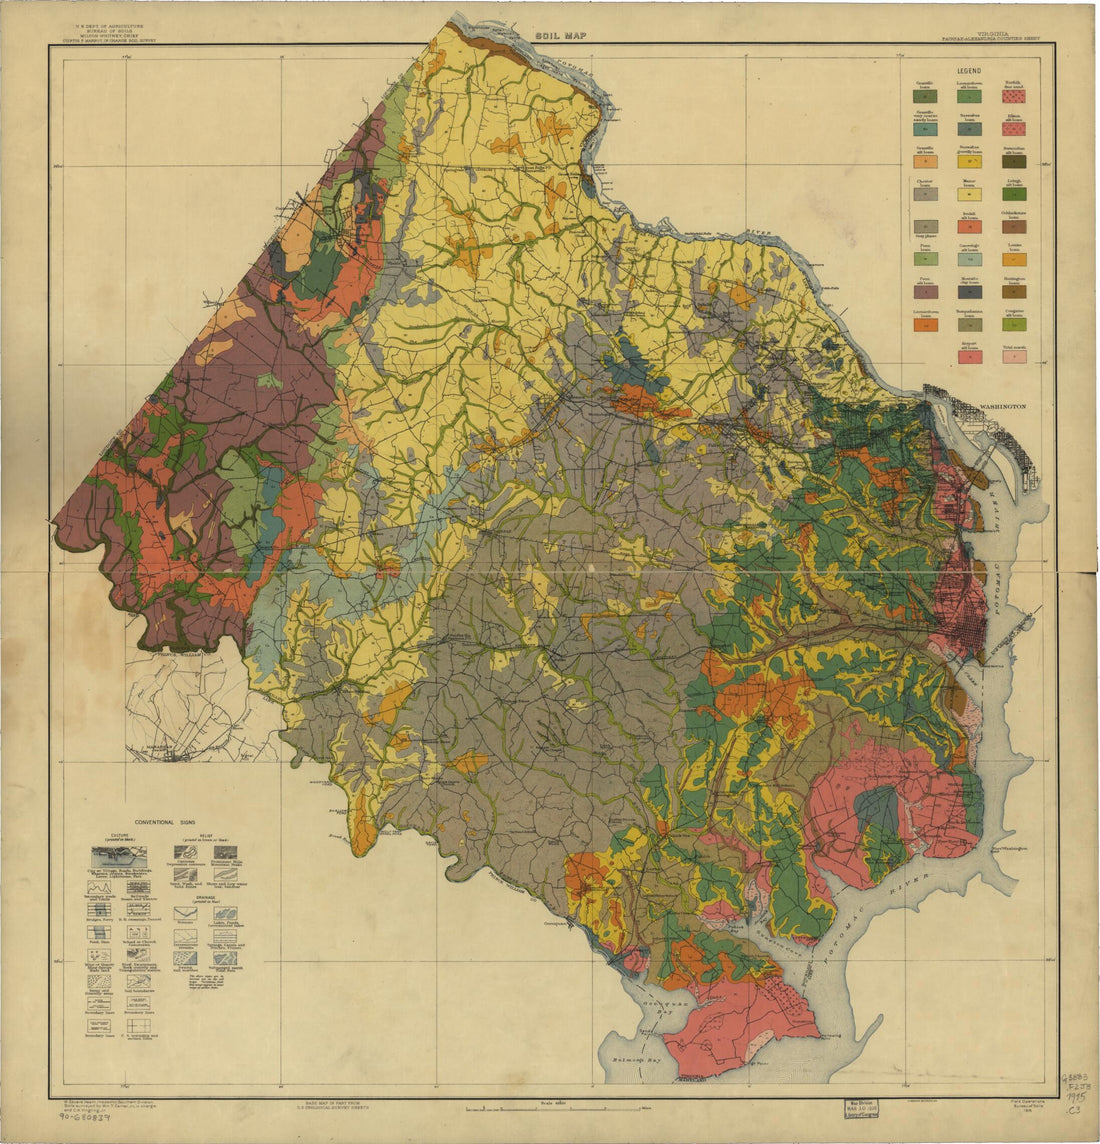 This old map of Alexandria Counties Sheet, Soil Map from 1915 was created by  A. Hoen &amp; Co, William T. (William Thomas) Carter,  Geological Survey (U.S.),  United States. Bureau of Soils, C. K. Yingling in 1915